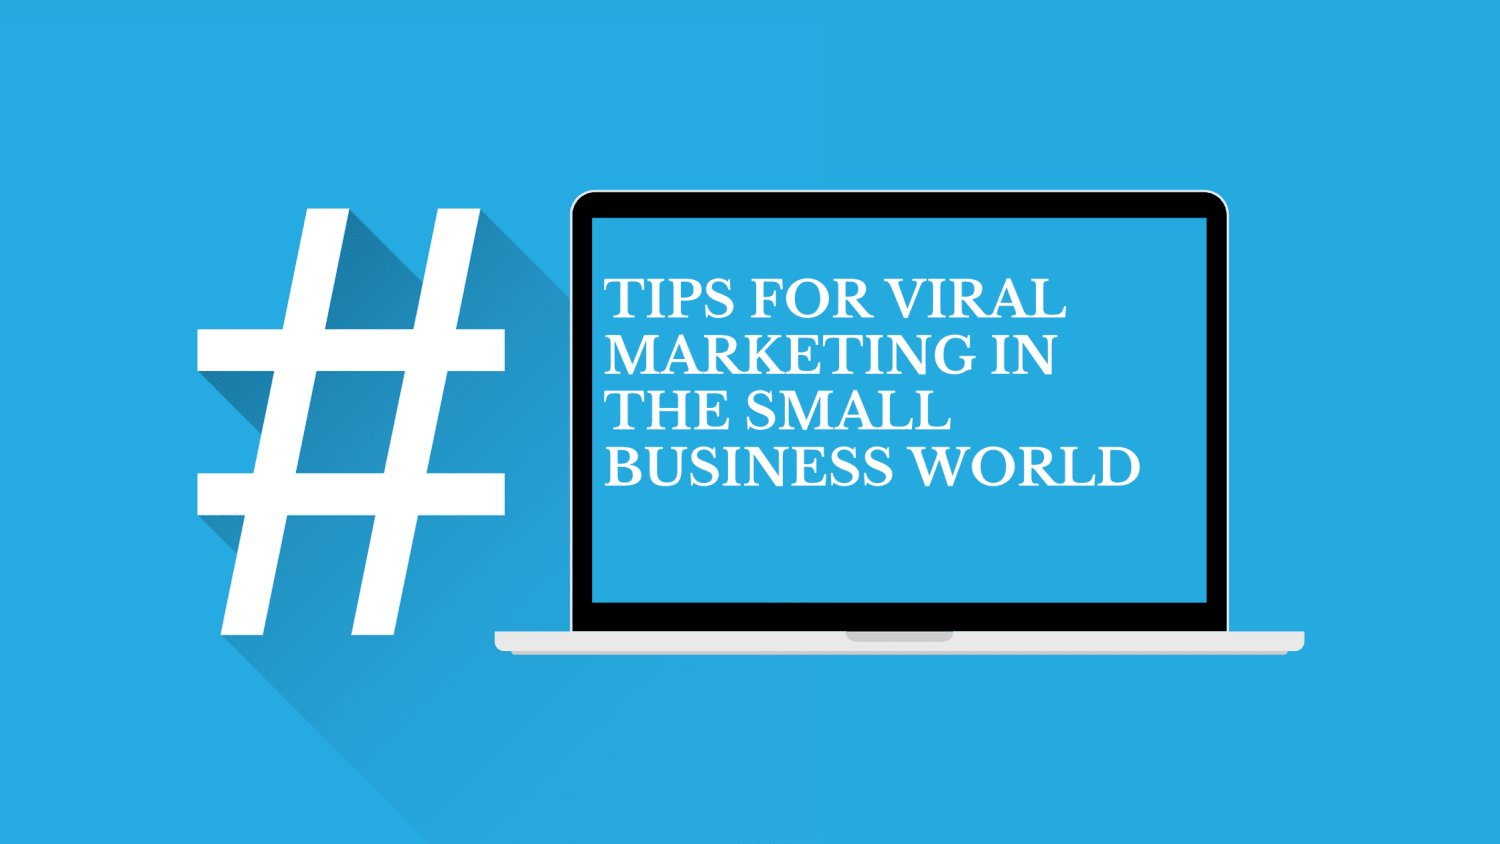 Tips For Viral Marketing in the Small Business World